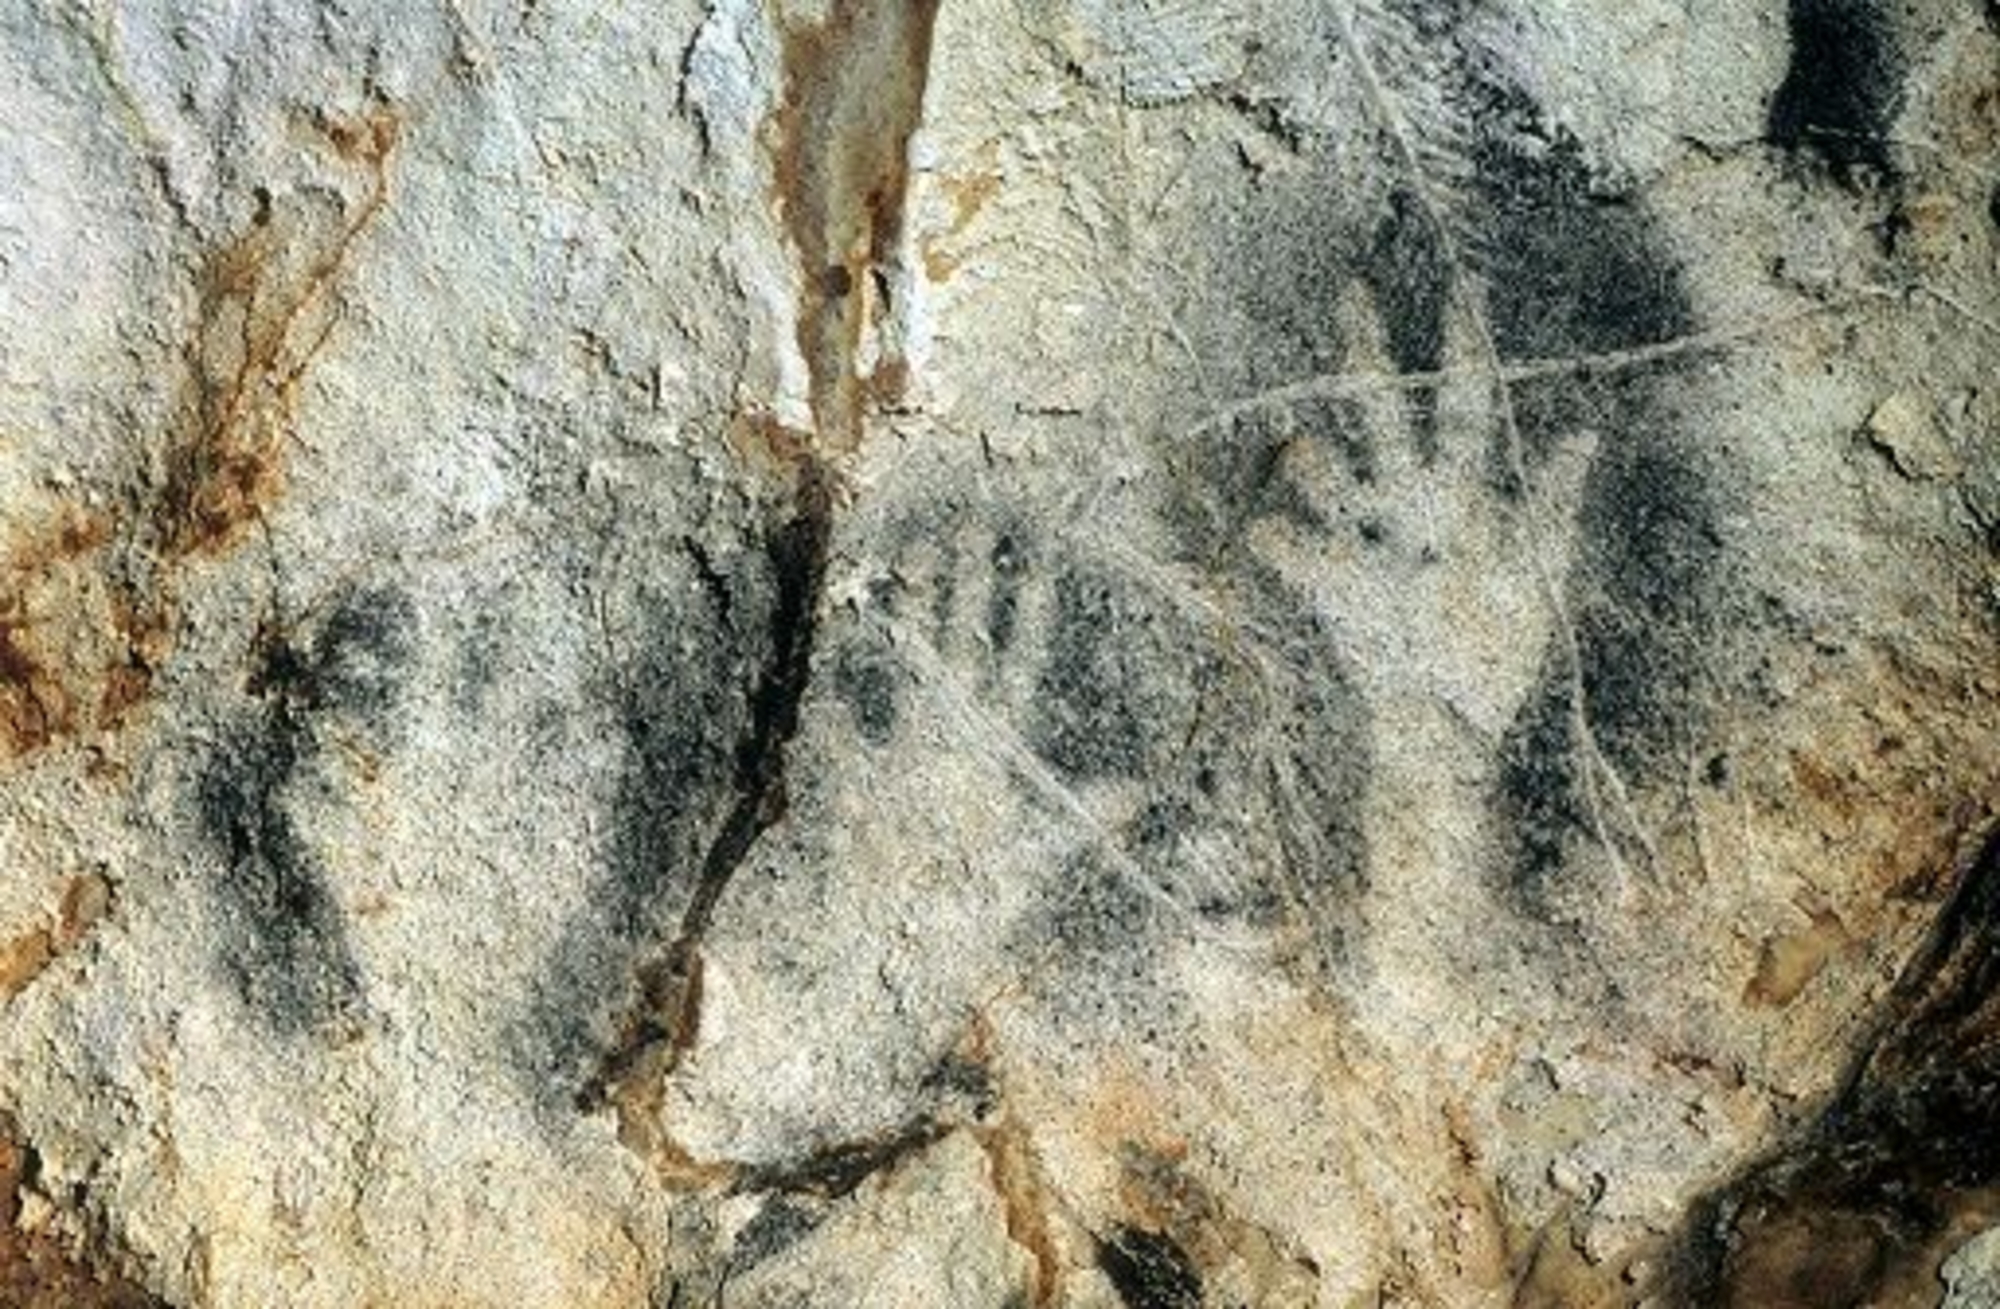 Photograph of three negative hands from Cosquer cave